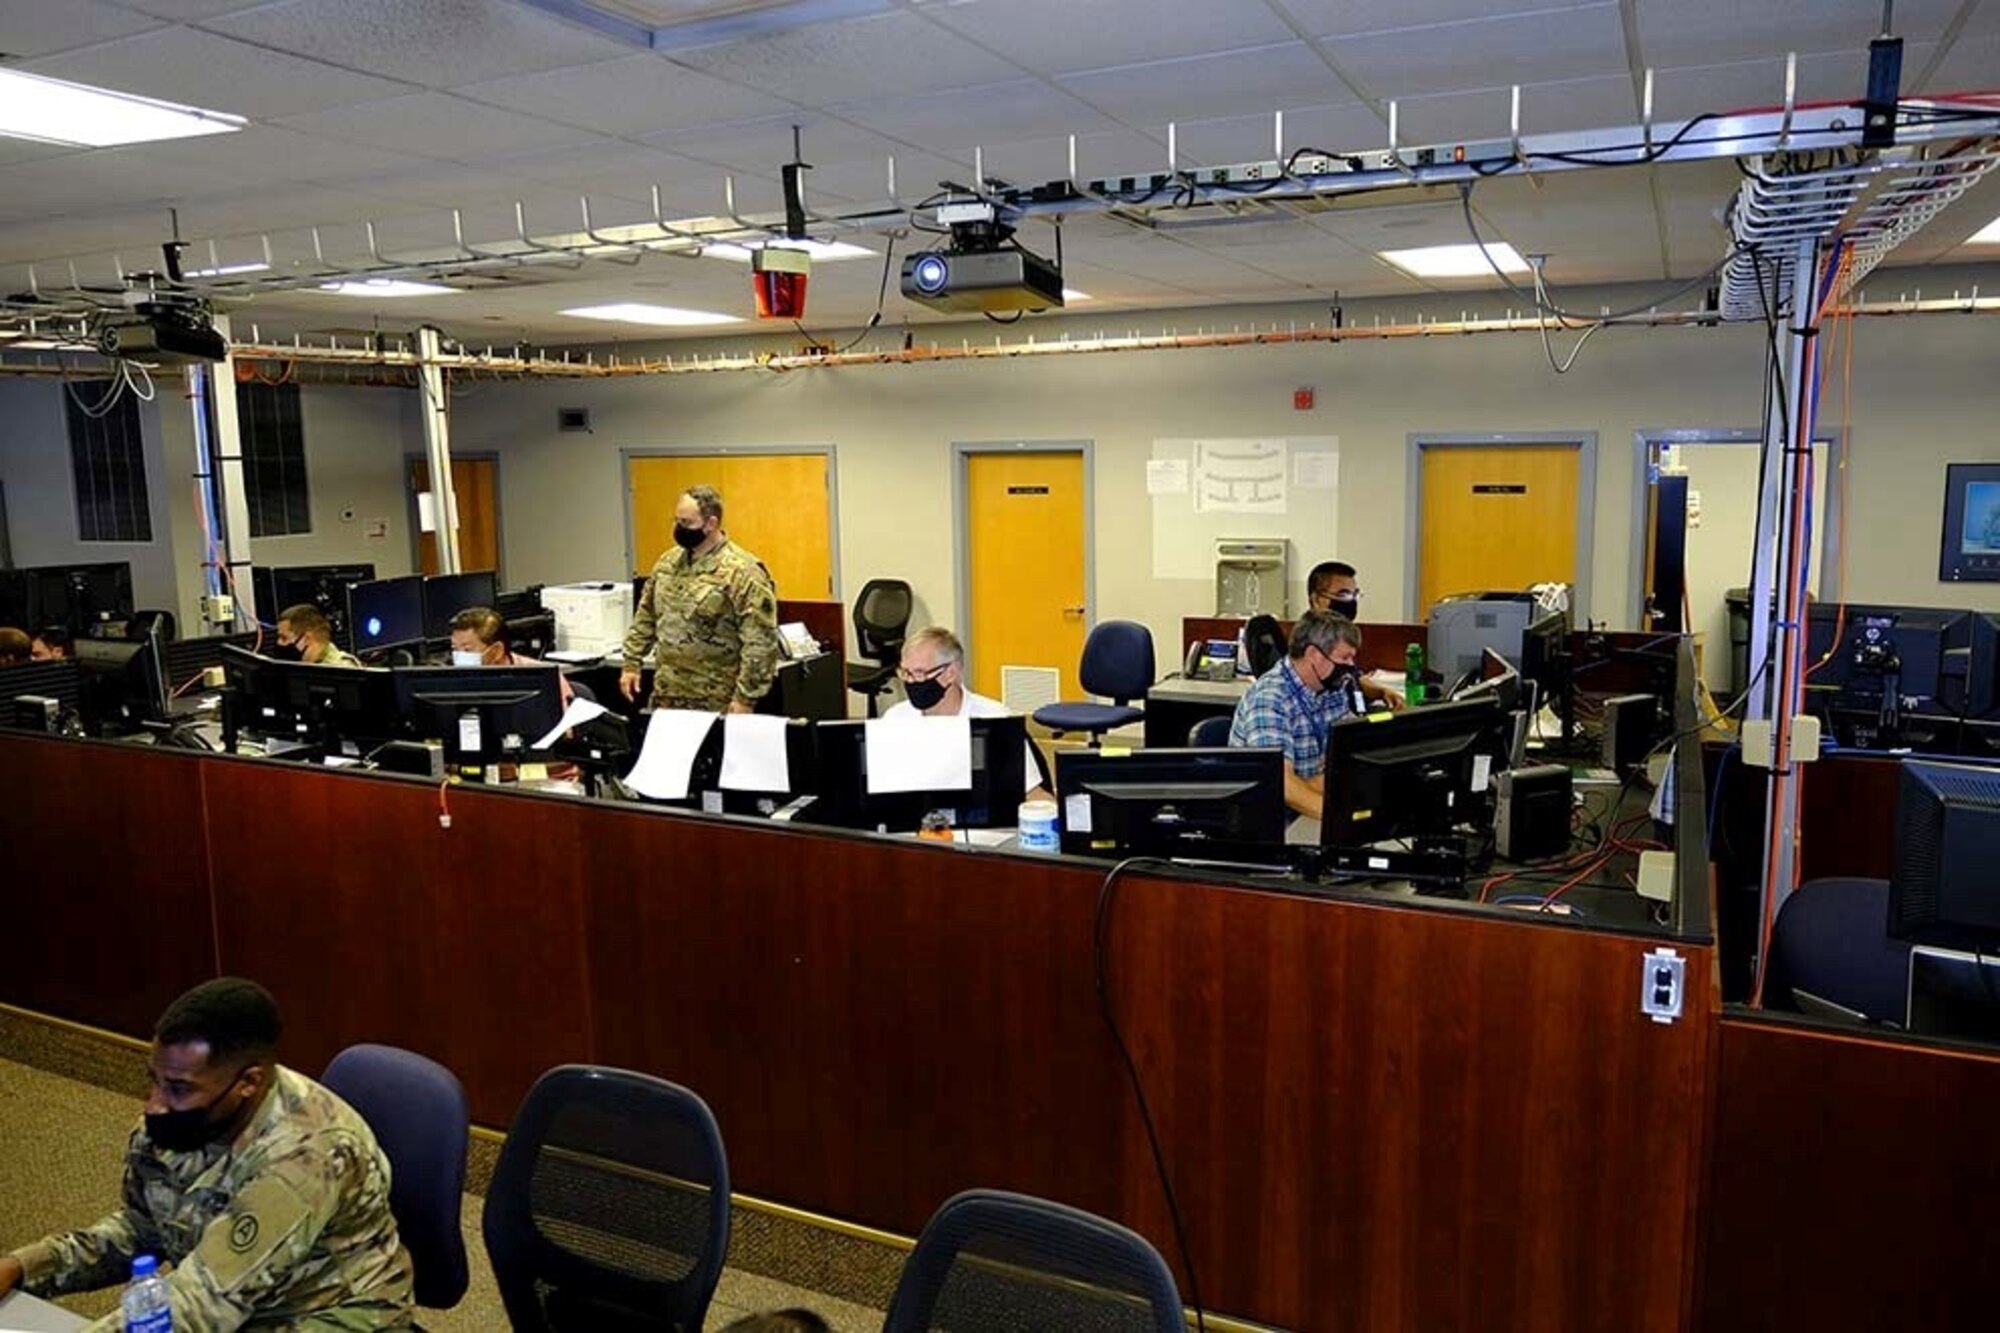 Photo of U.S. Air Force Airmen, civilians and contractors sitting at computers.